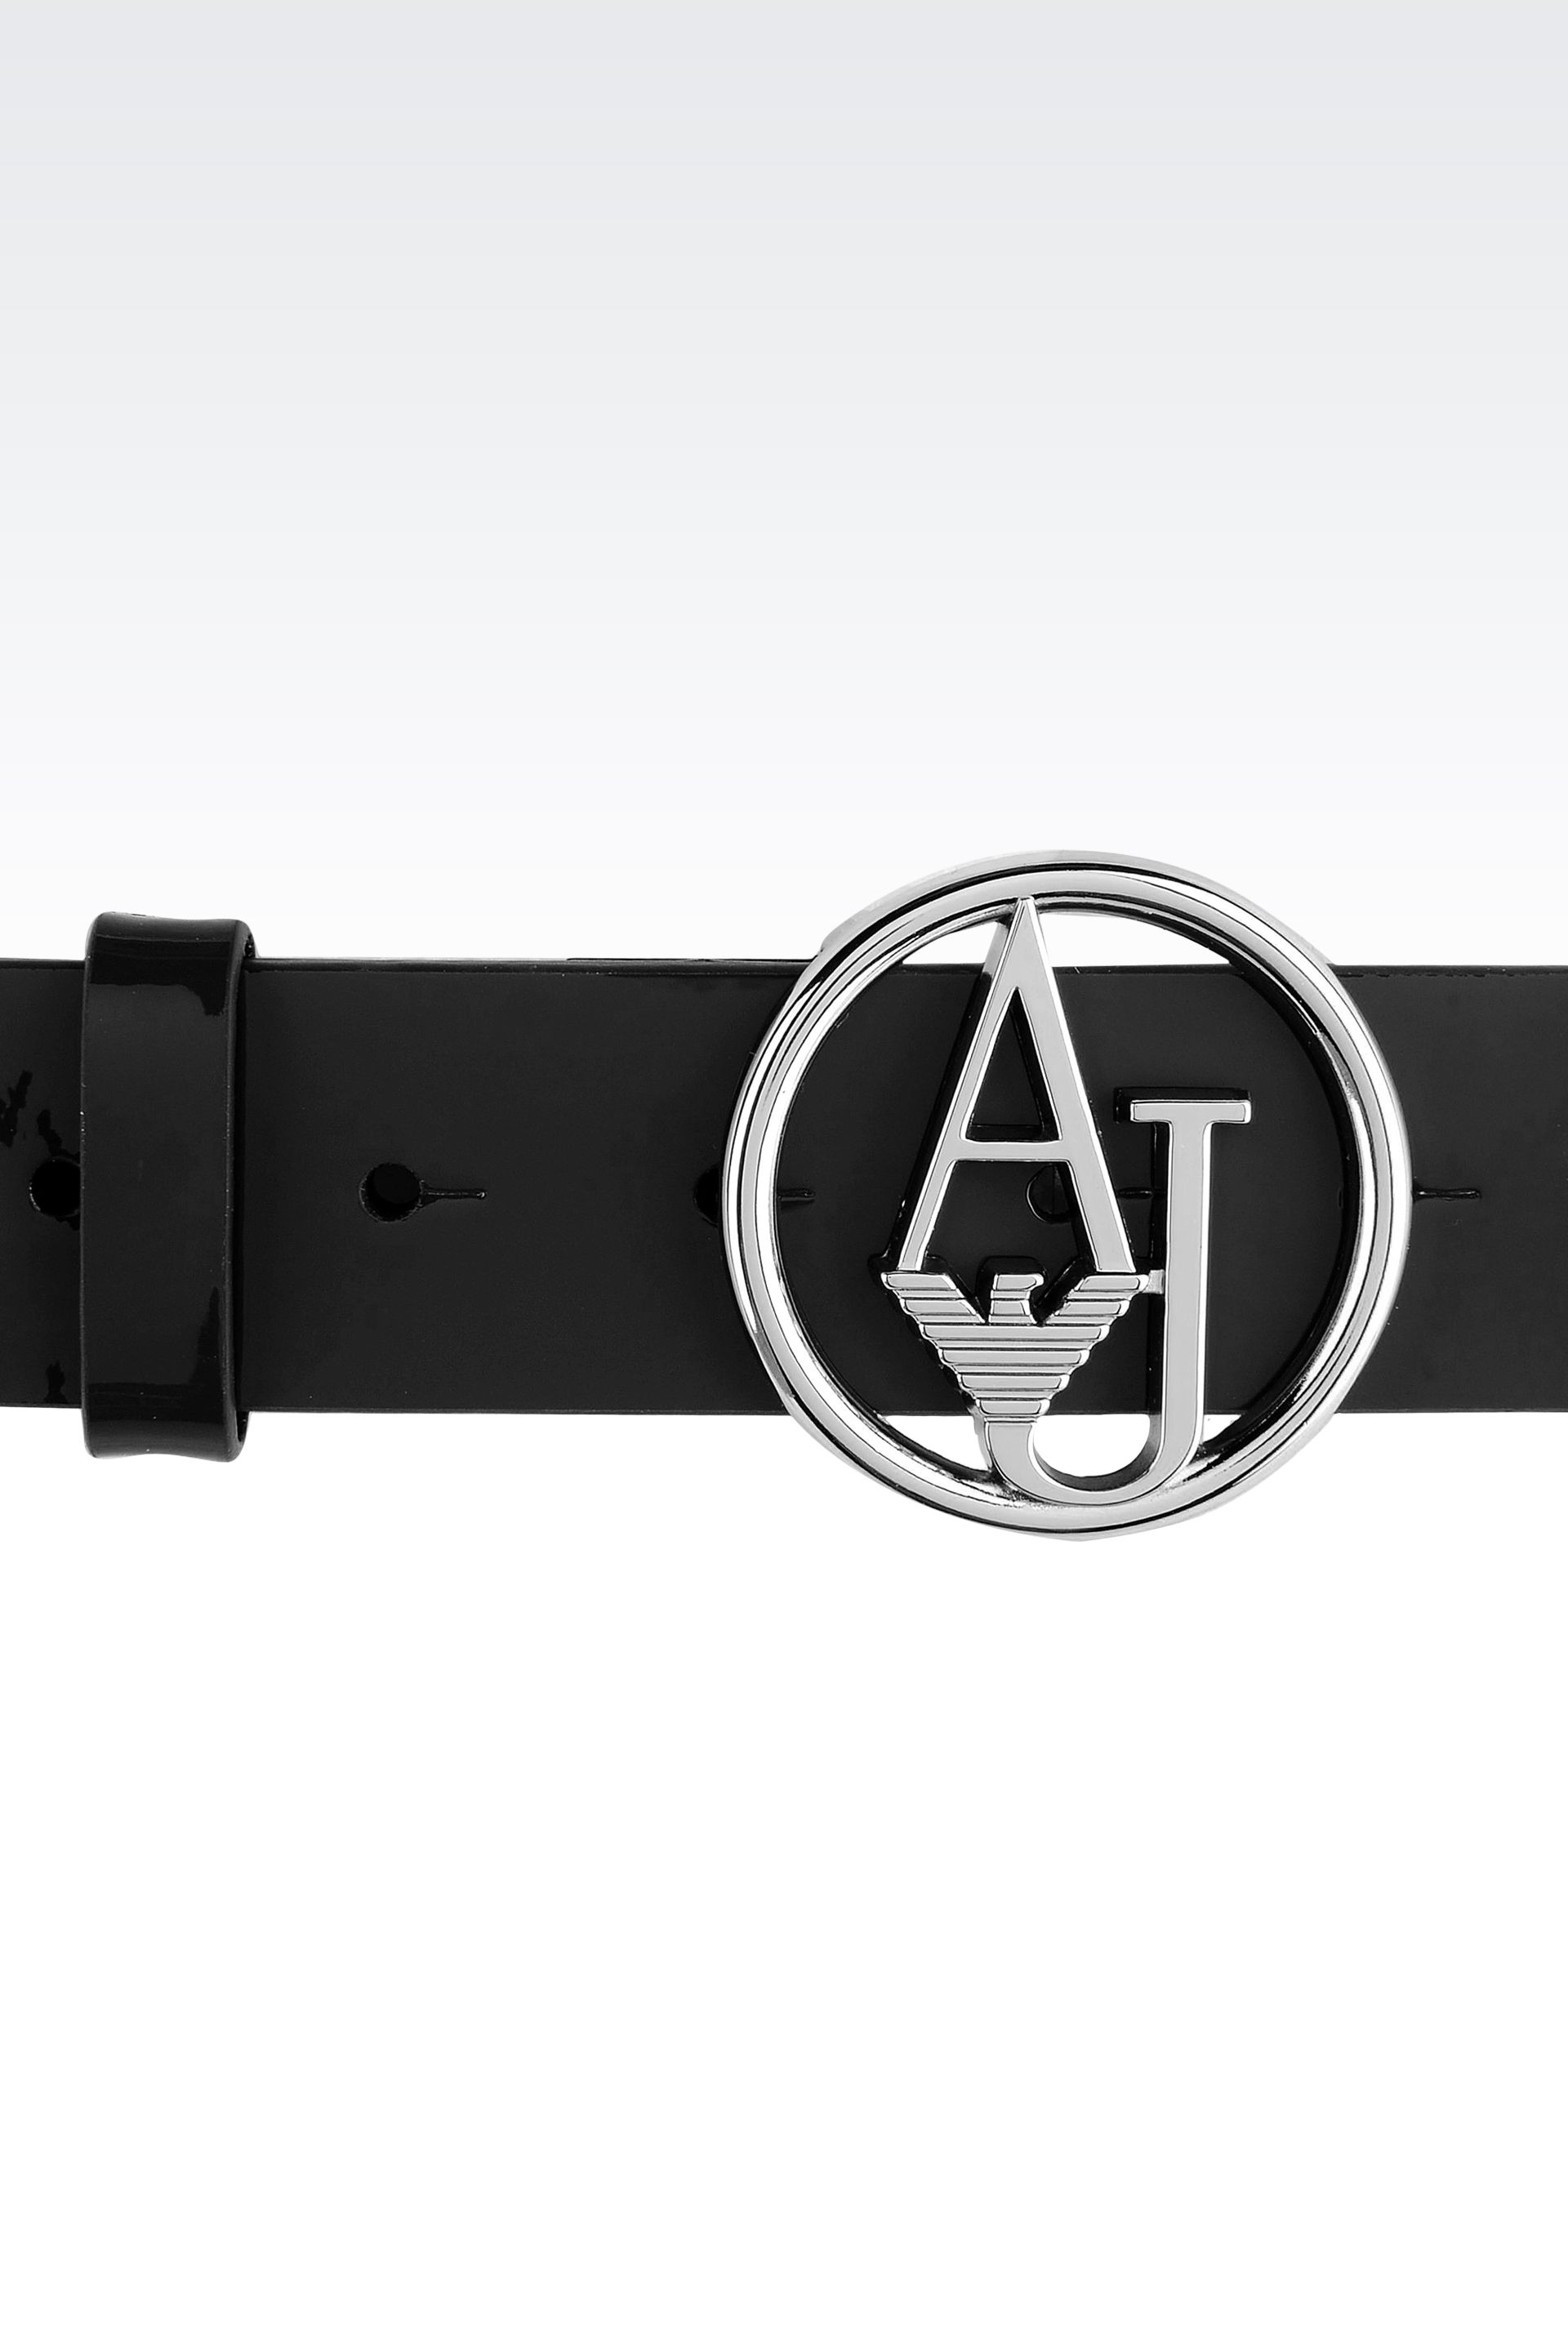 Armani Jeans Patent Leather Belt with Logoed Buckle in Black - Lyst